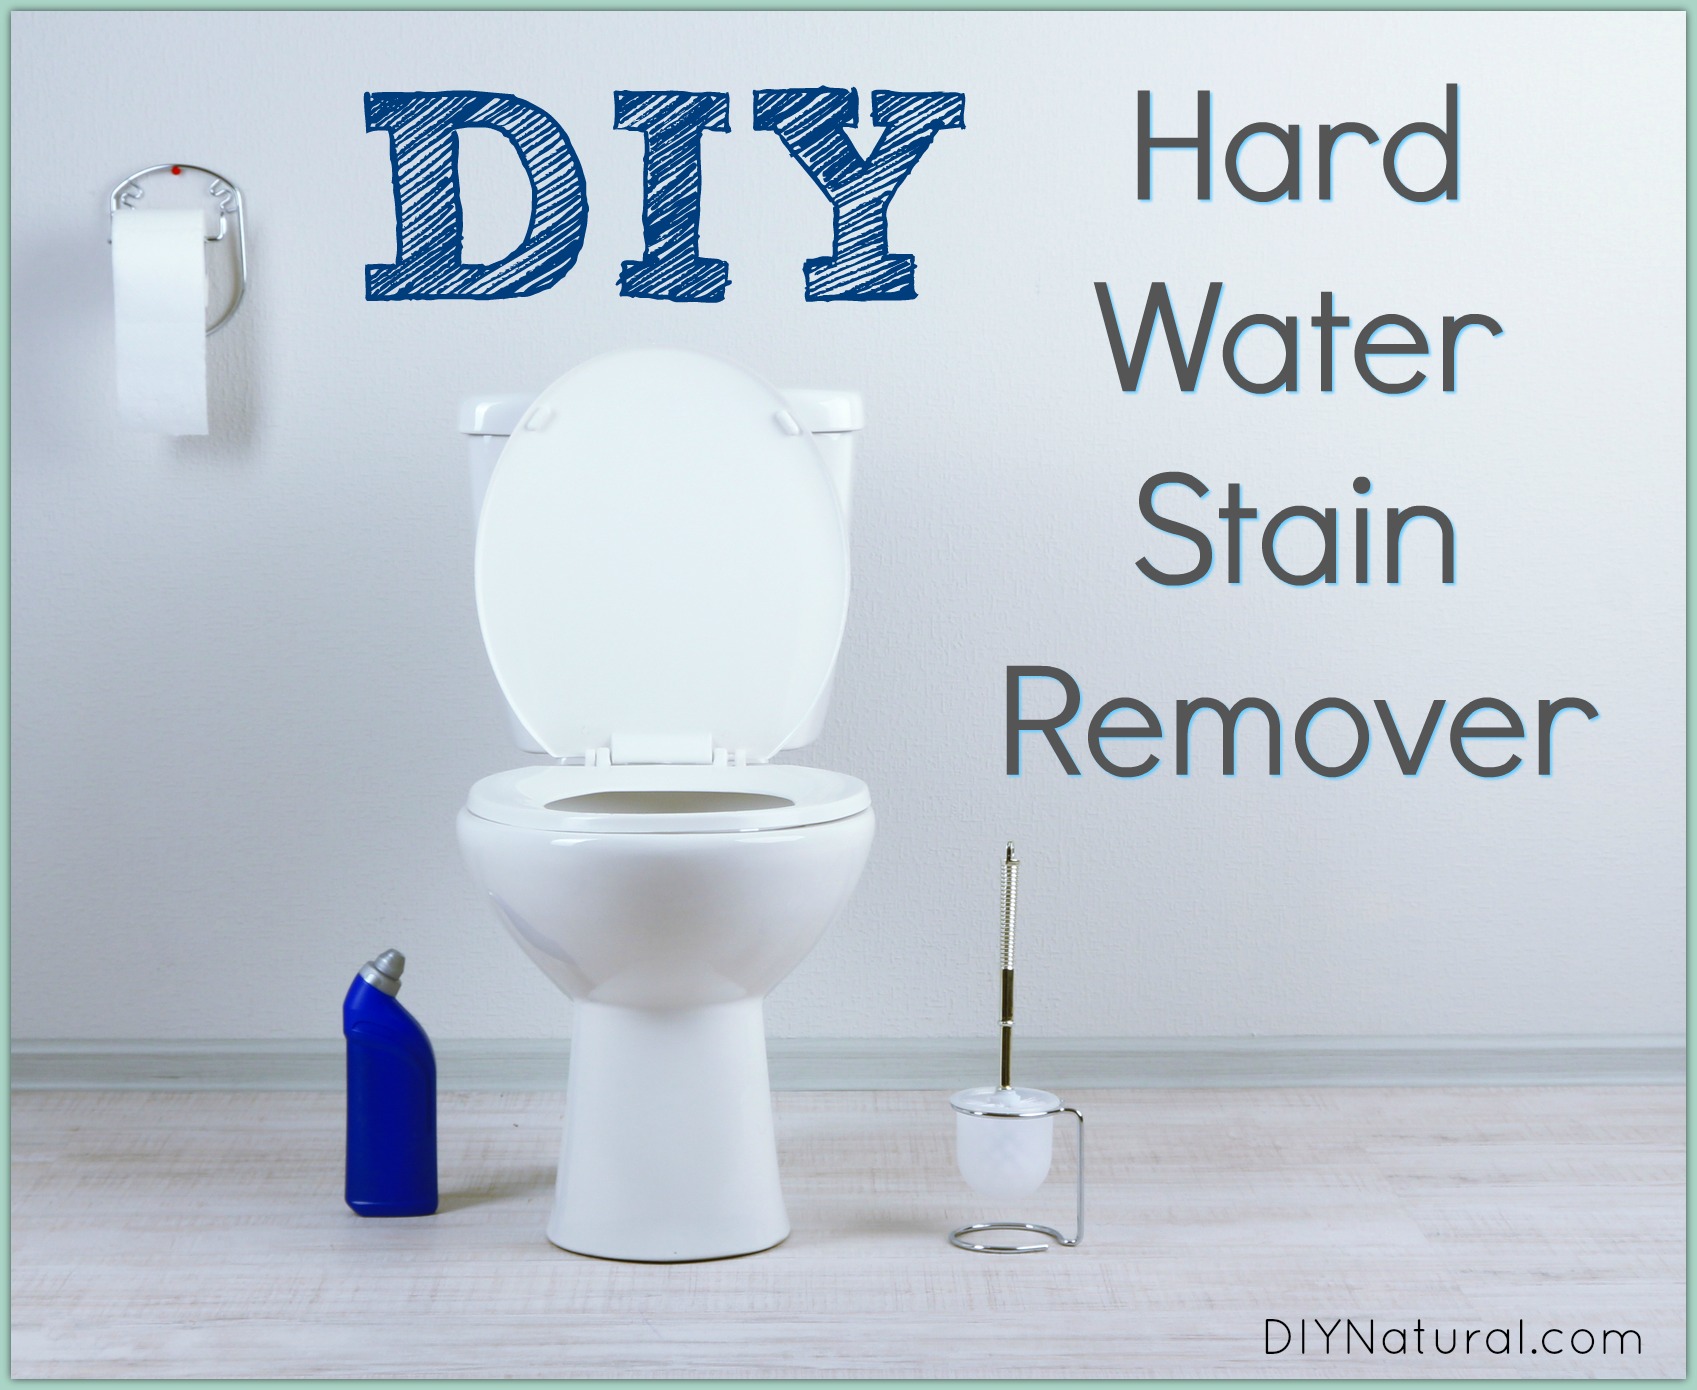 A Diy Hard Water Stain Remover Recipe For Cleaning Toilets And More